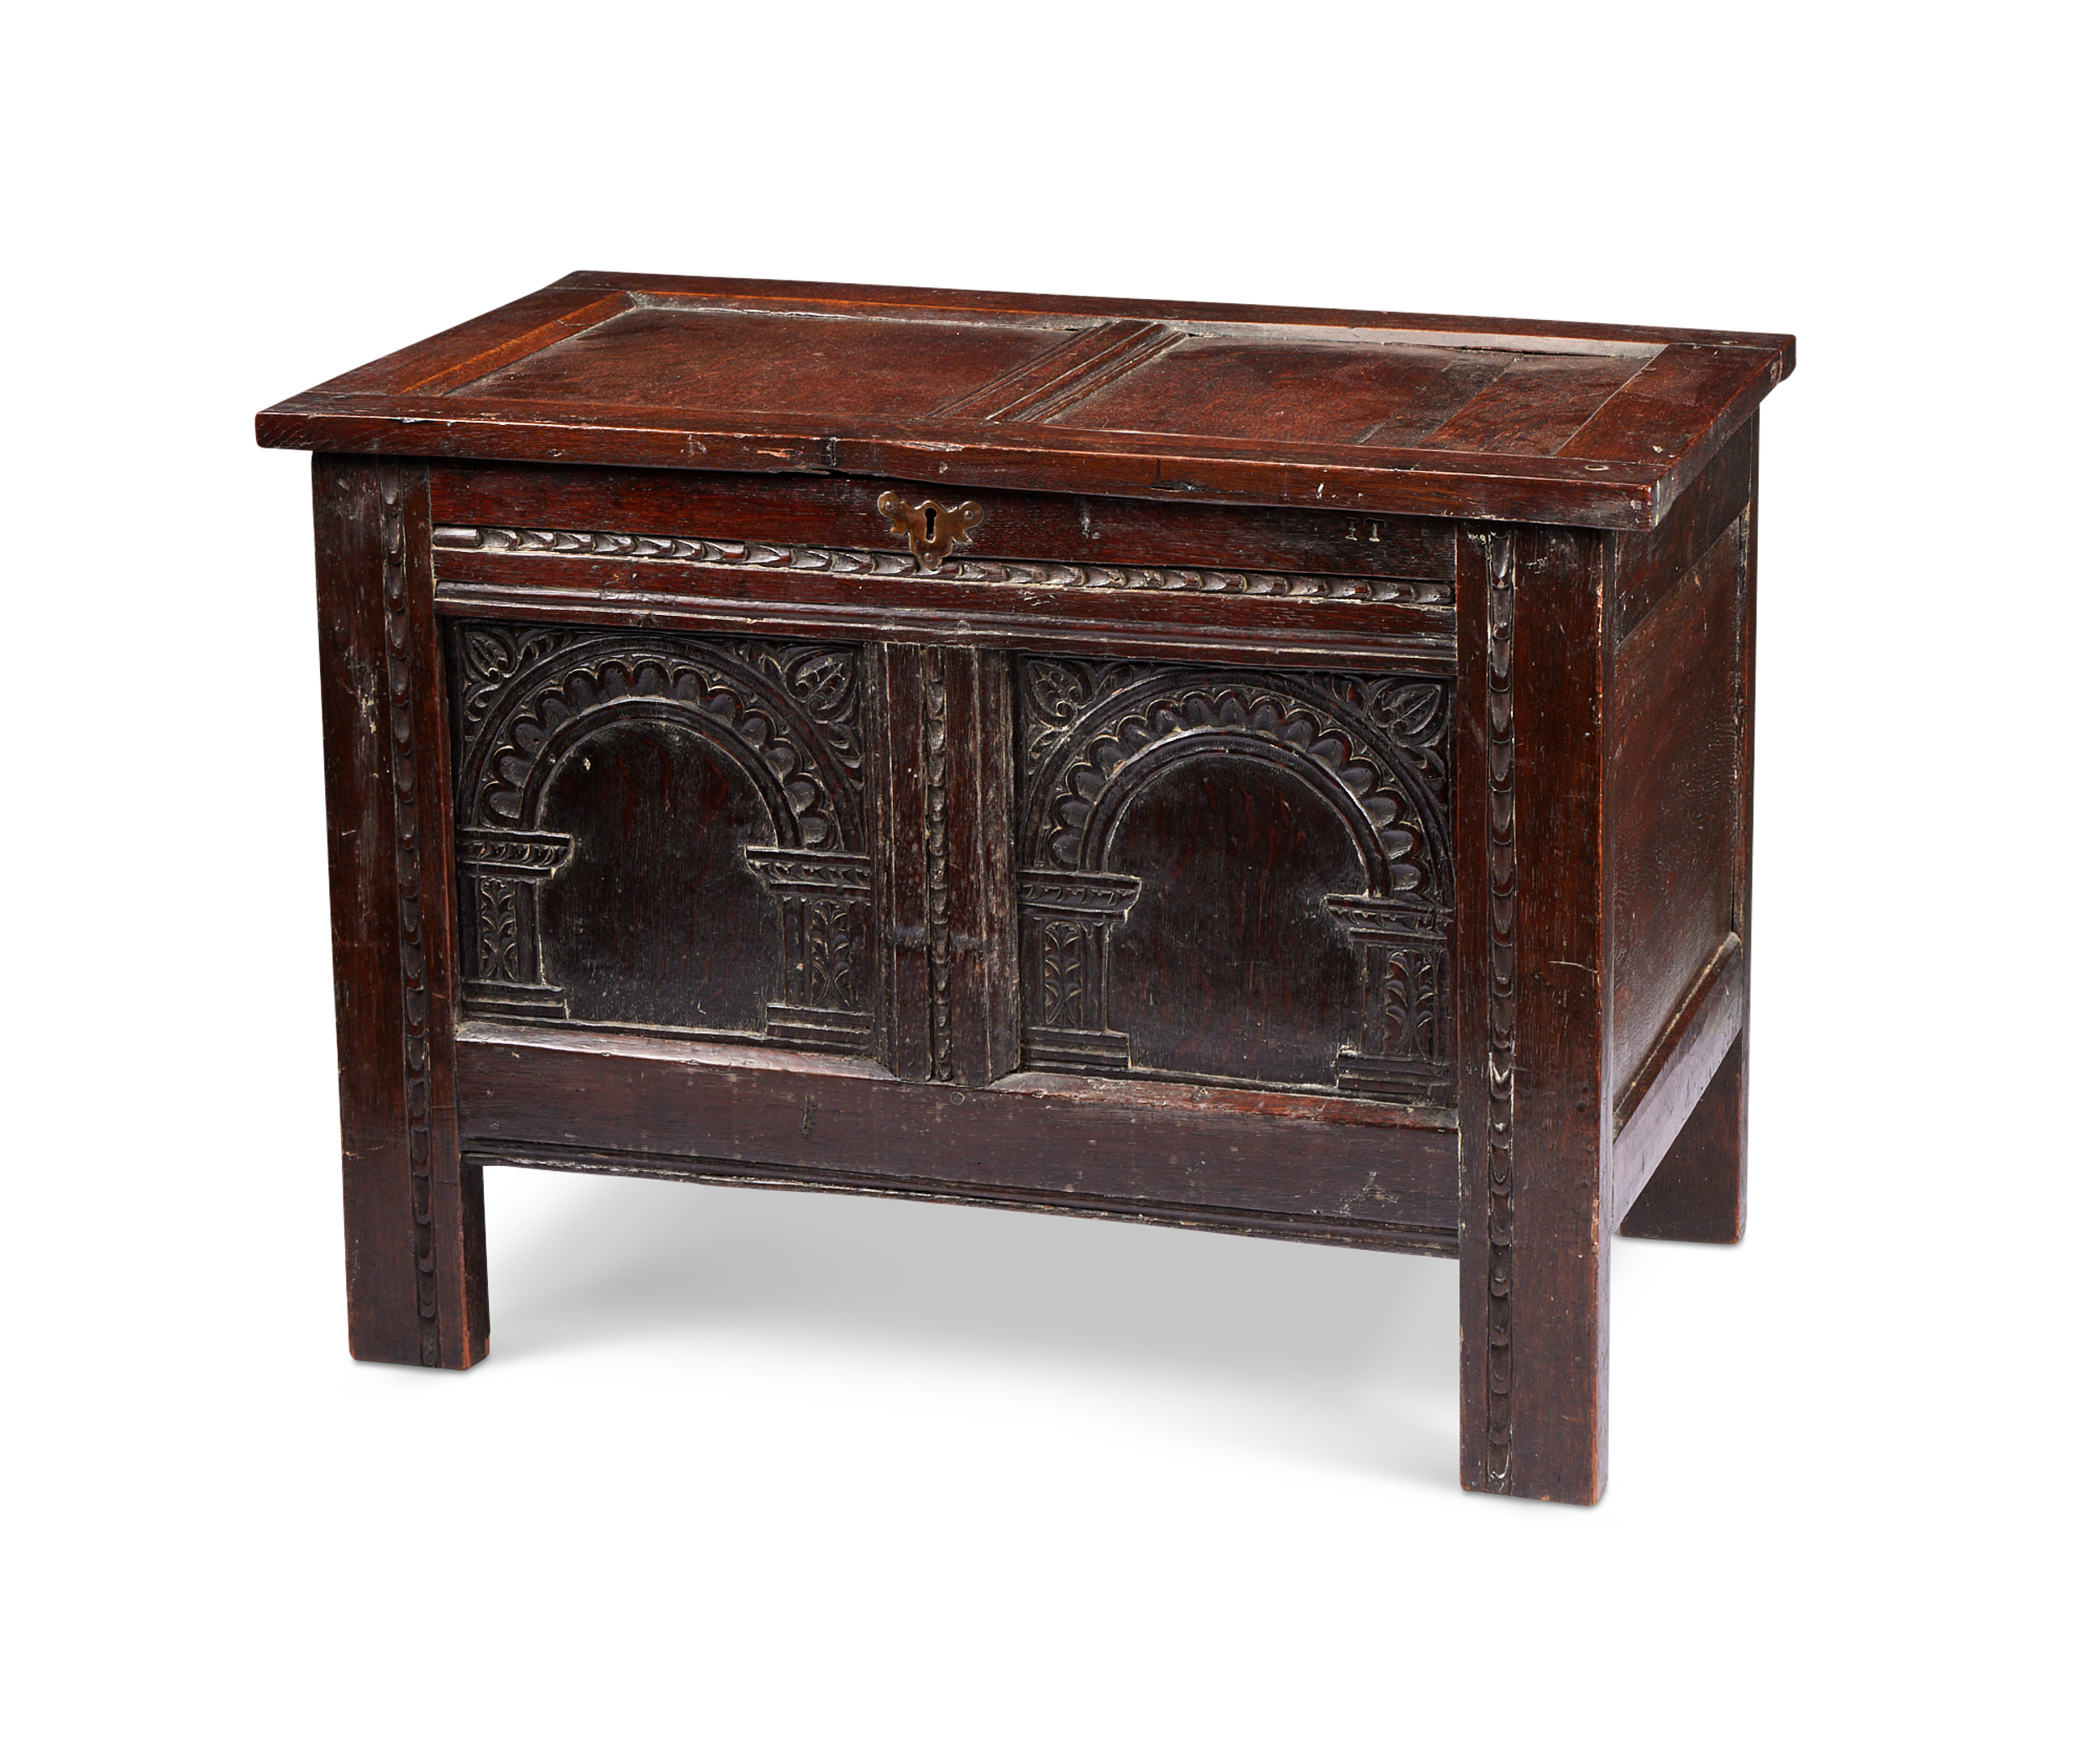 A small late 17th century oak carved chest